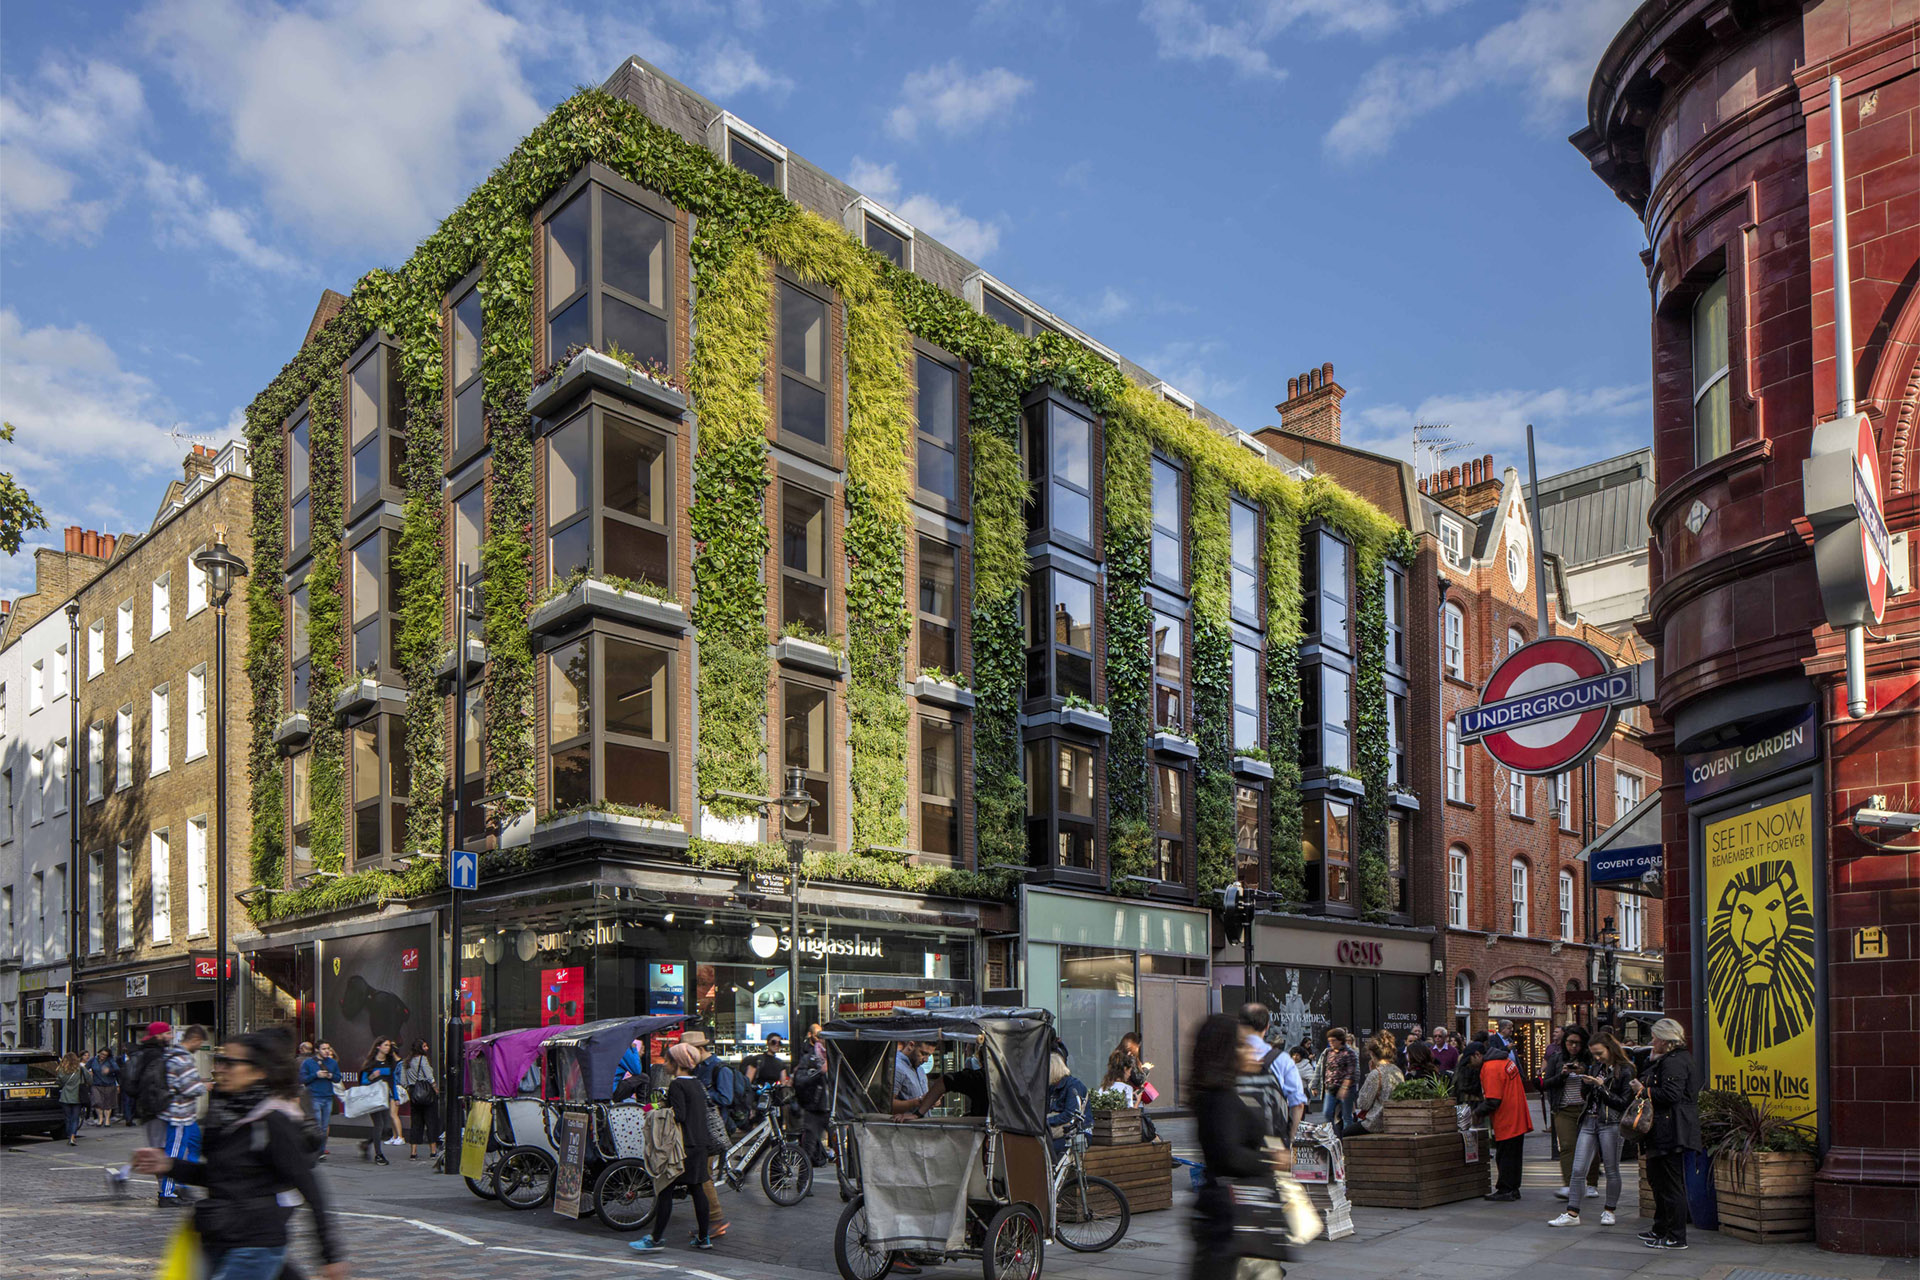 Our third inspirational urban greening project: Covent Garden Living Wall